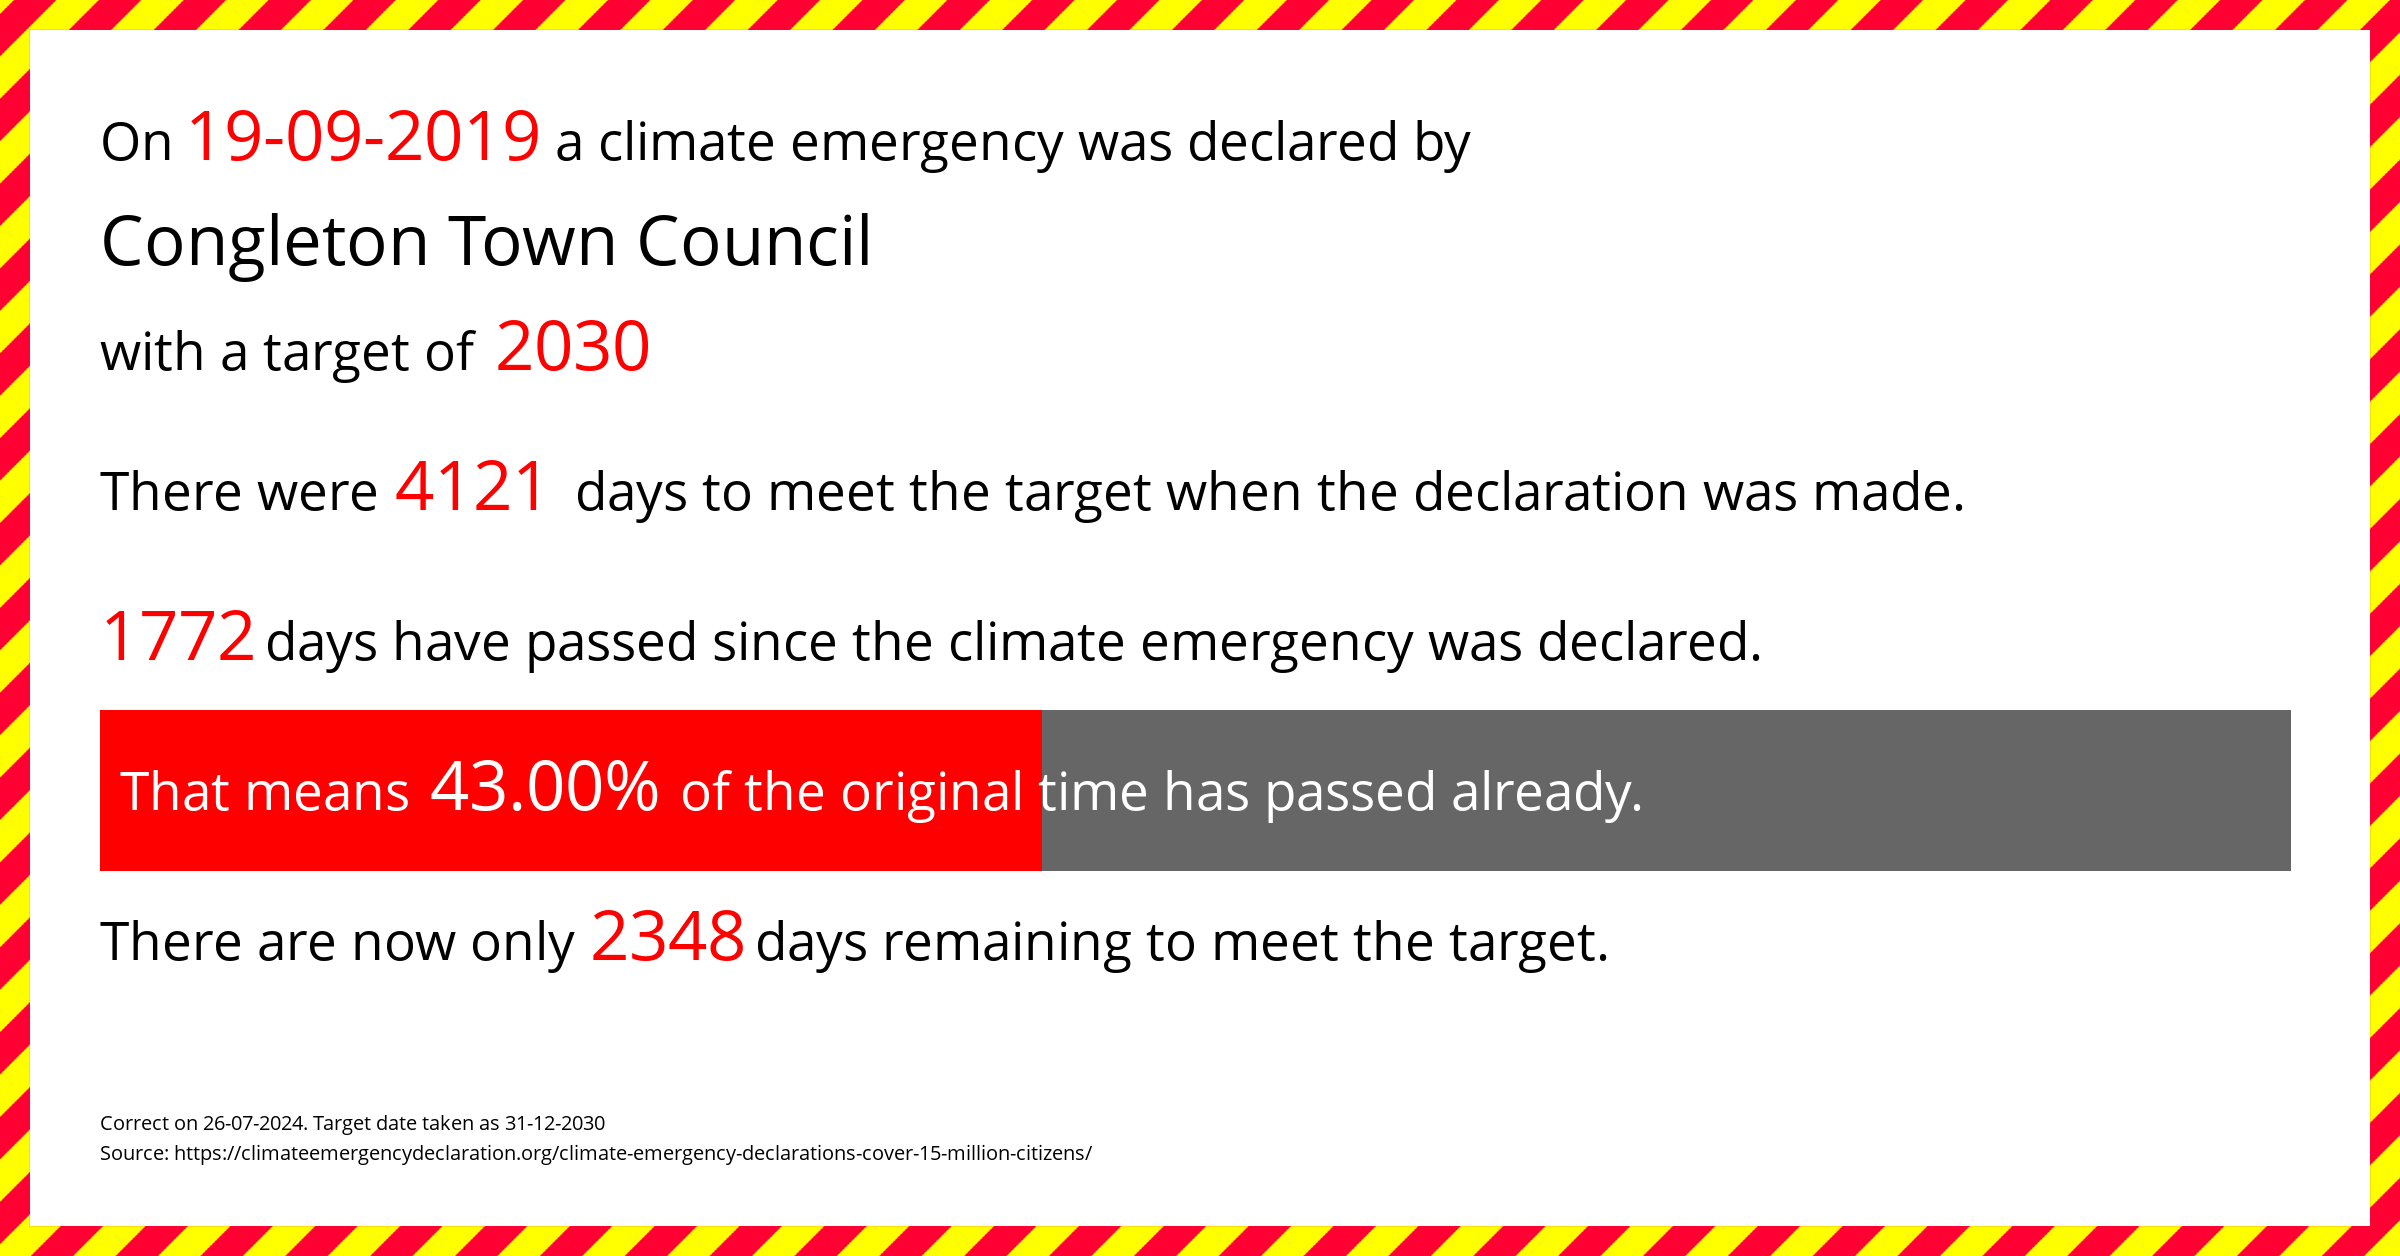 Congleton Town Council declared a Climate emergency on Thursday 19th September 2019, with a target of 2030.